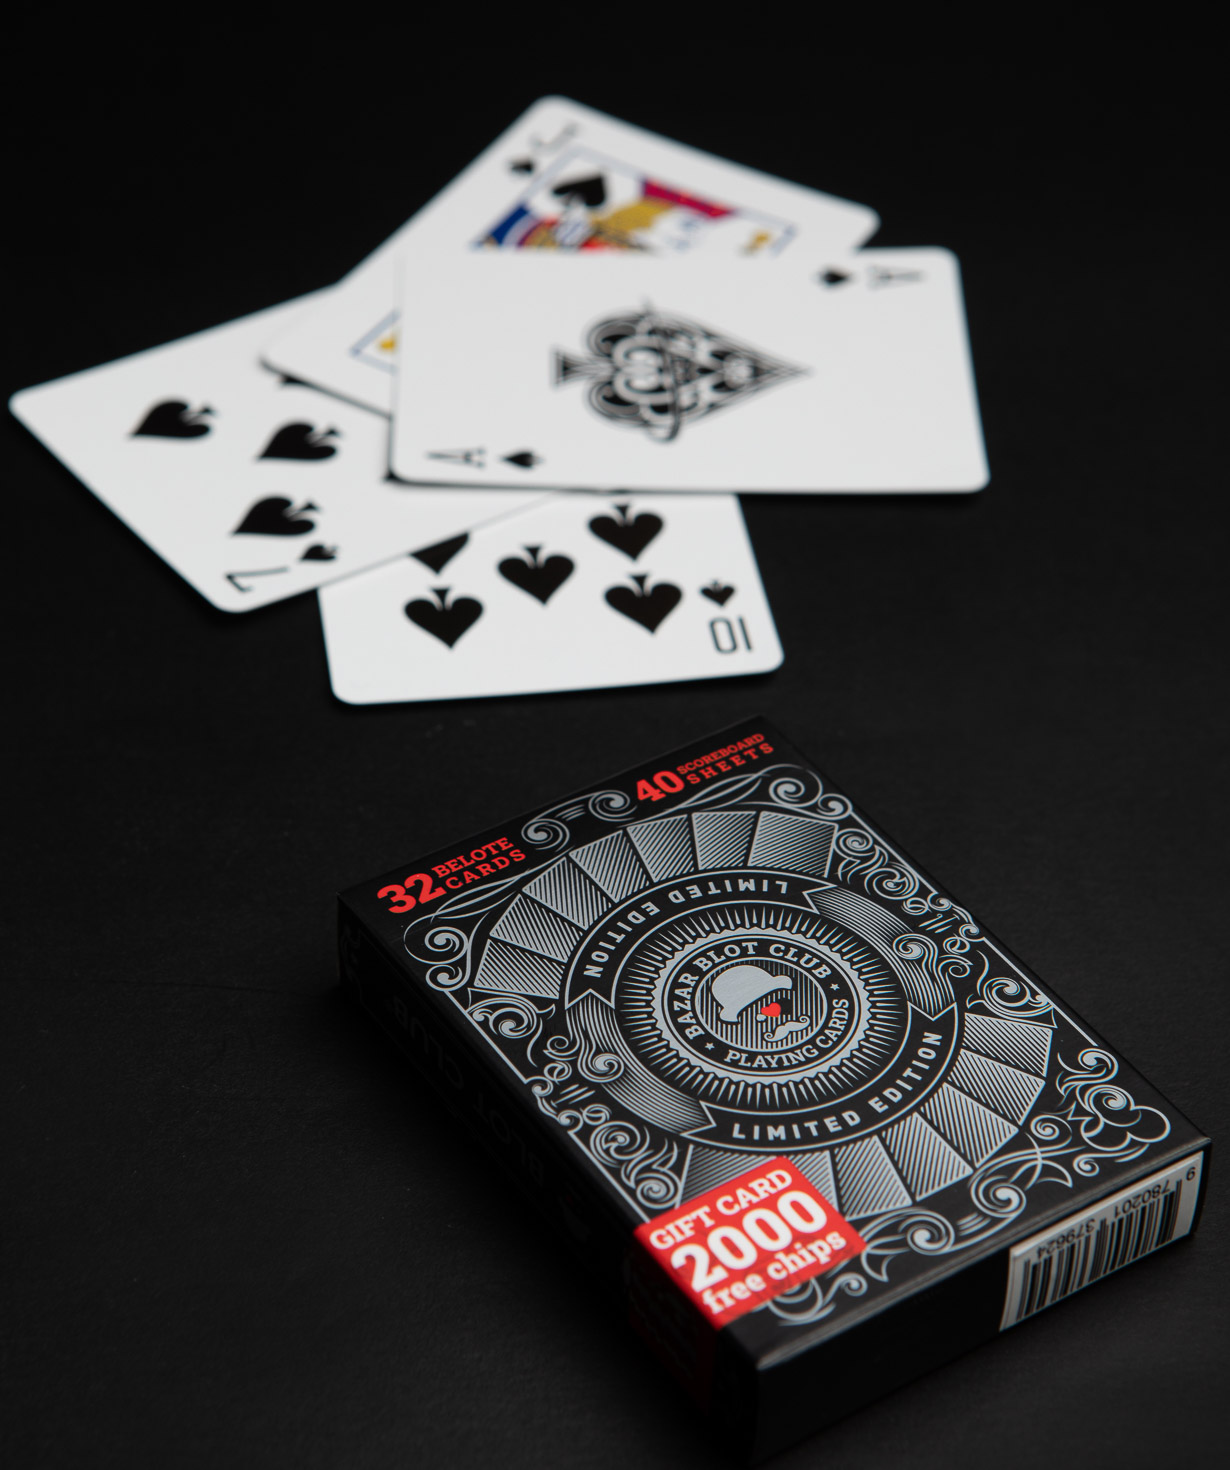 Playing cards for Blot  ''Blot Club''